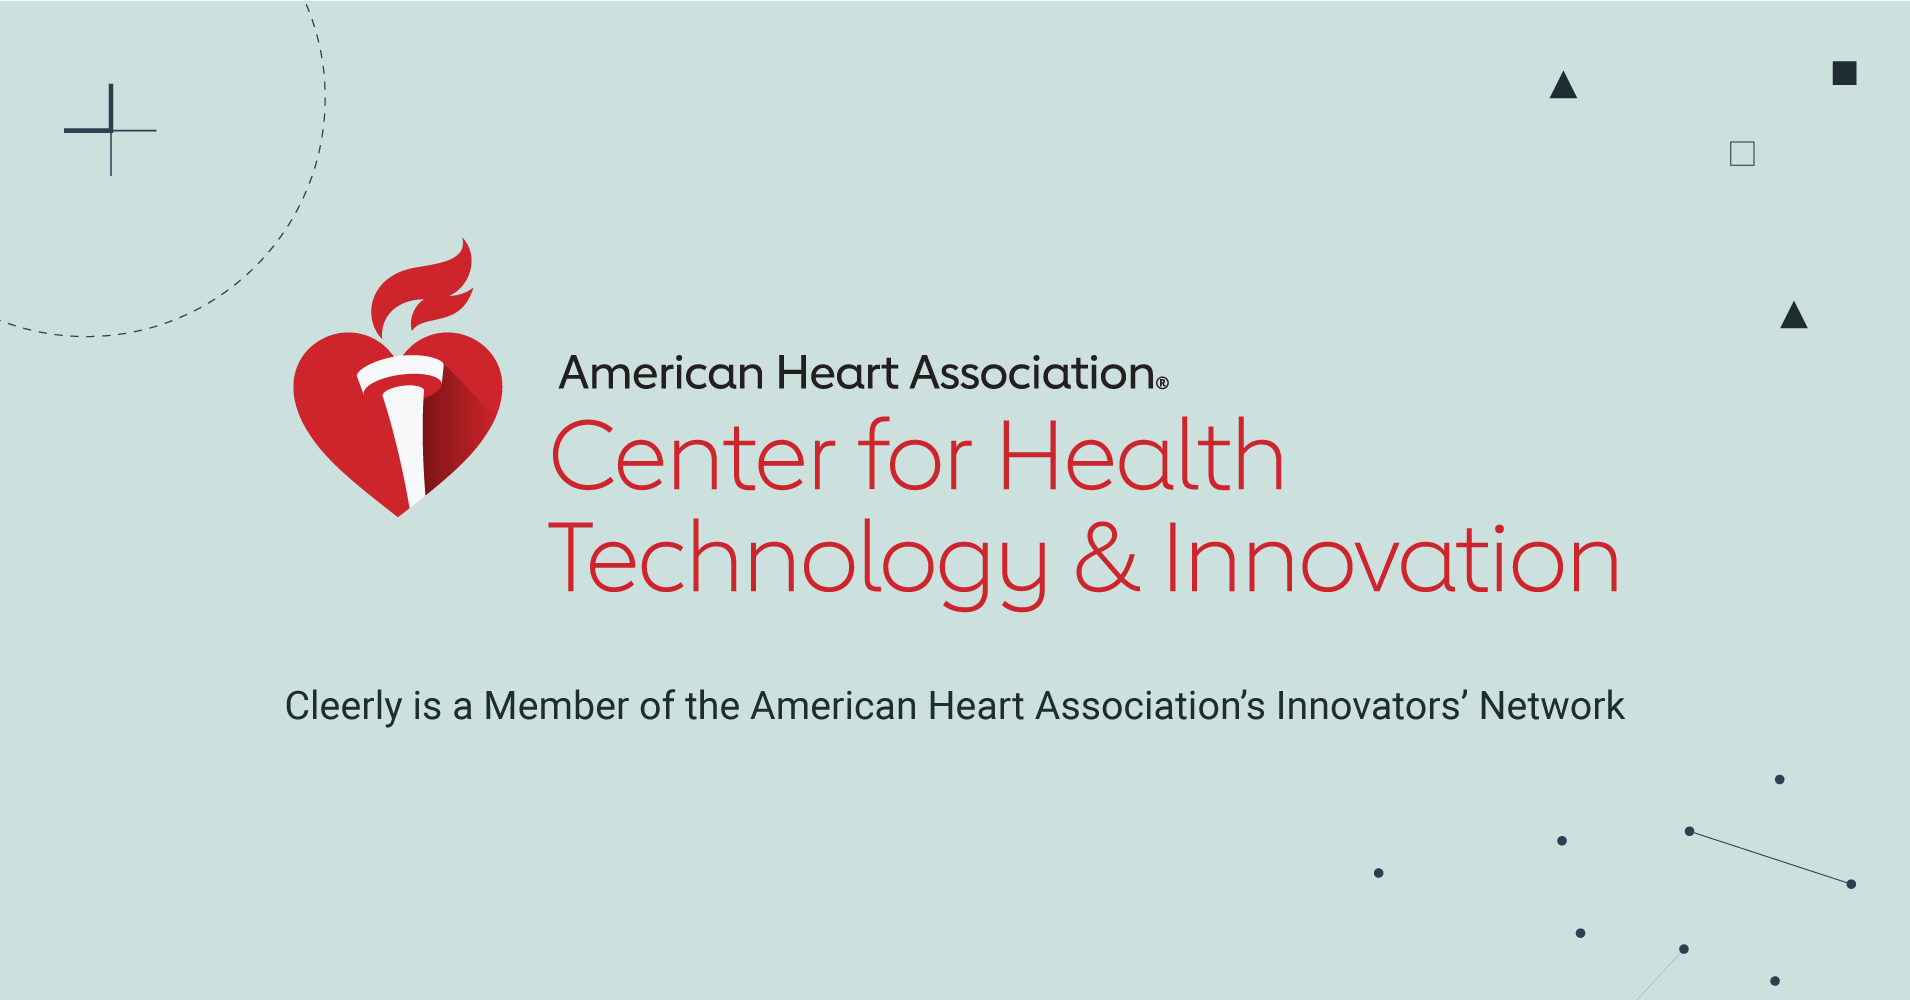 Cleerly joins AHA Center for Health Technology & Innovation Innovators’ Network